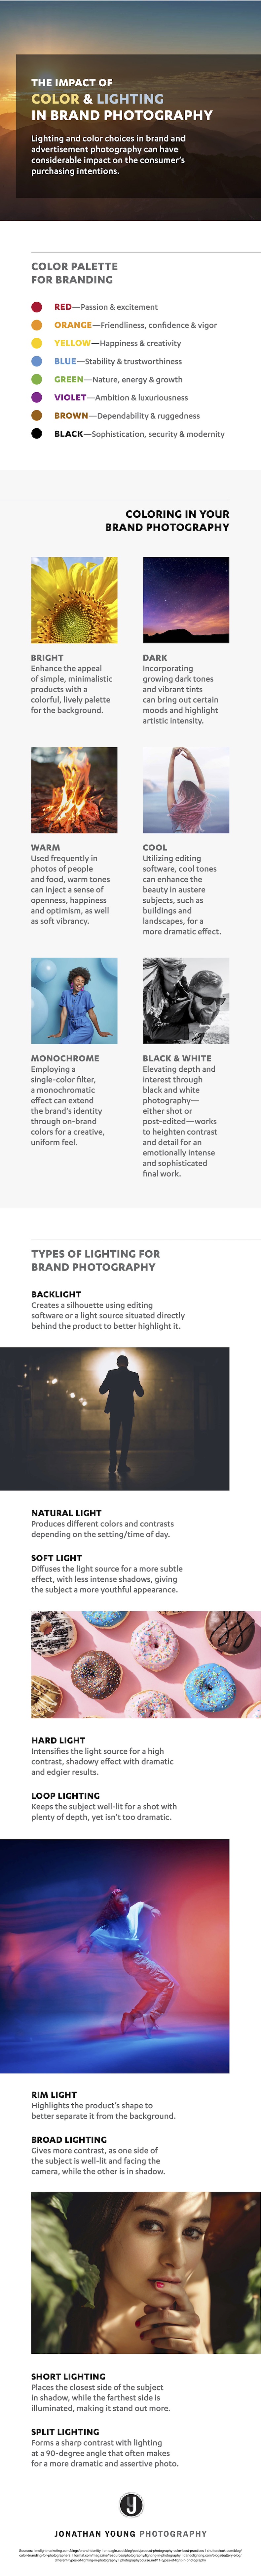 Impact of color and lighting in brand photography